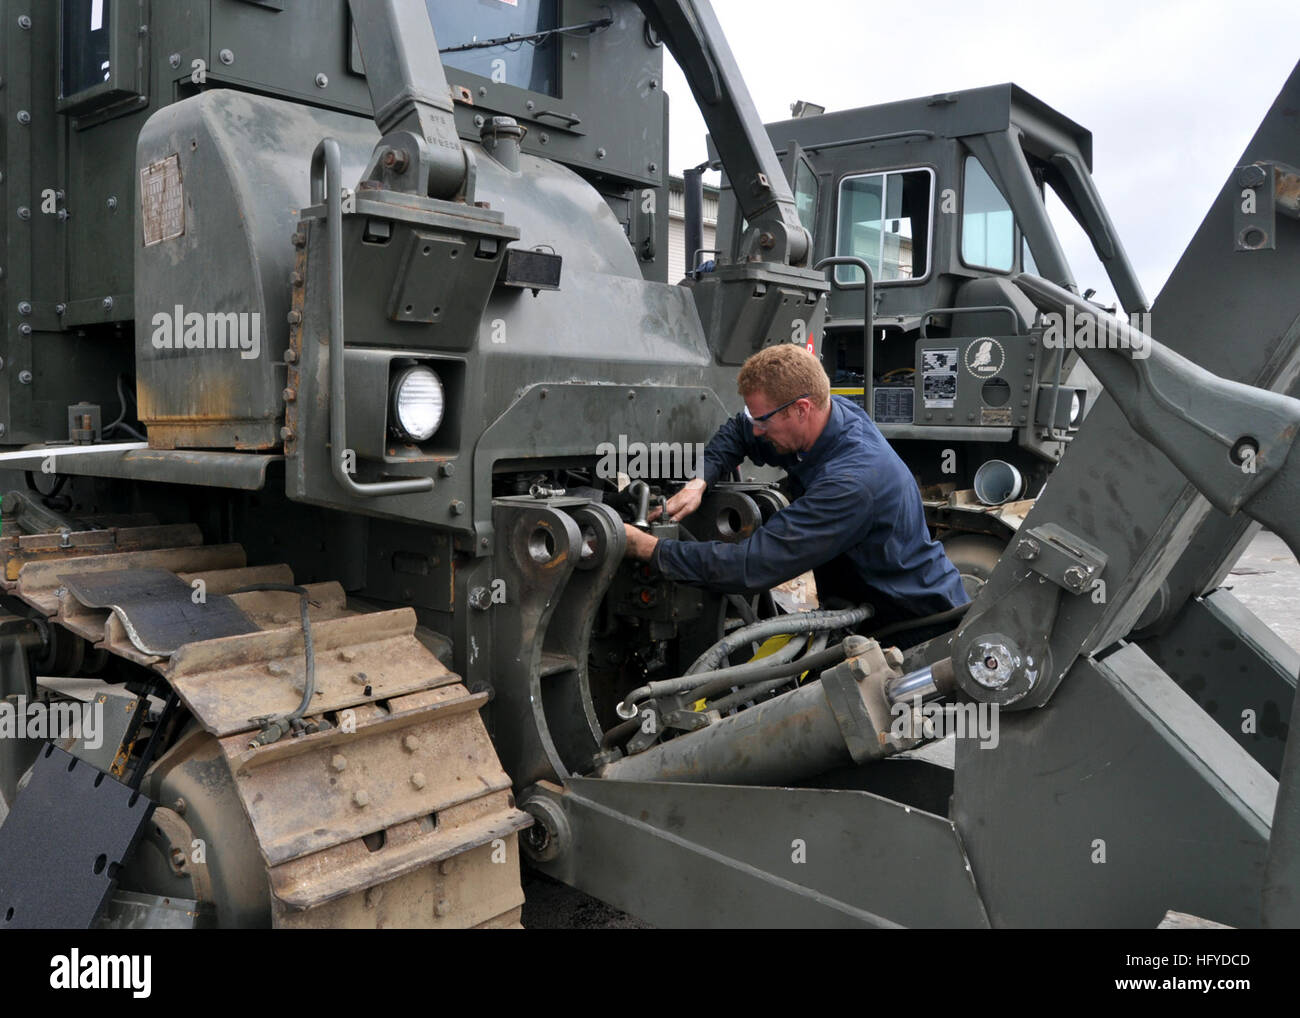 100908-N-3089C-001 PORT HUENEME, Calif. (Sept. 8, 2010)  A Naval Facilities Expeditionary Logistics Center mechanic puts the finishing touches on an armored Caterpillar D7 dozer for use building forward operating bases in Afghanistan. NFELC outfits Navy expeditionary forces with equipment necessary to perform global operational missions. (U.S. Navy photo by James P. Cencer/Released) US Navy 100908-N-3089C-001 Sailor prepares a dozer for deployment Stock Photo